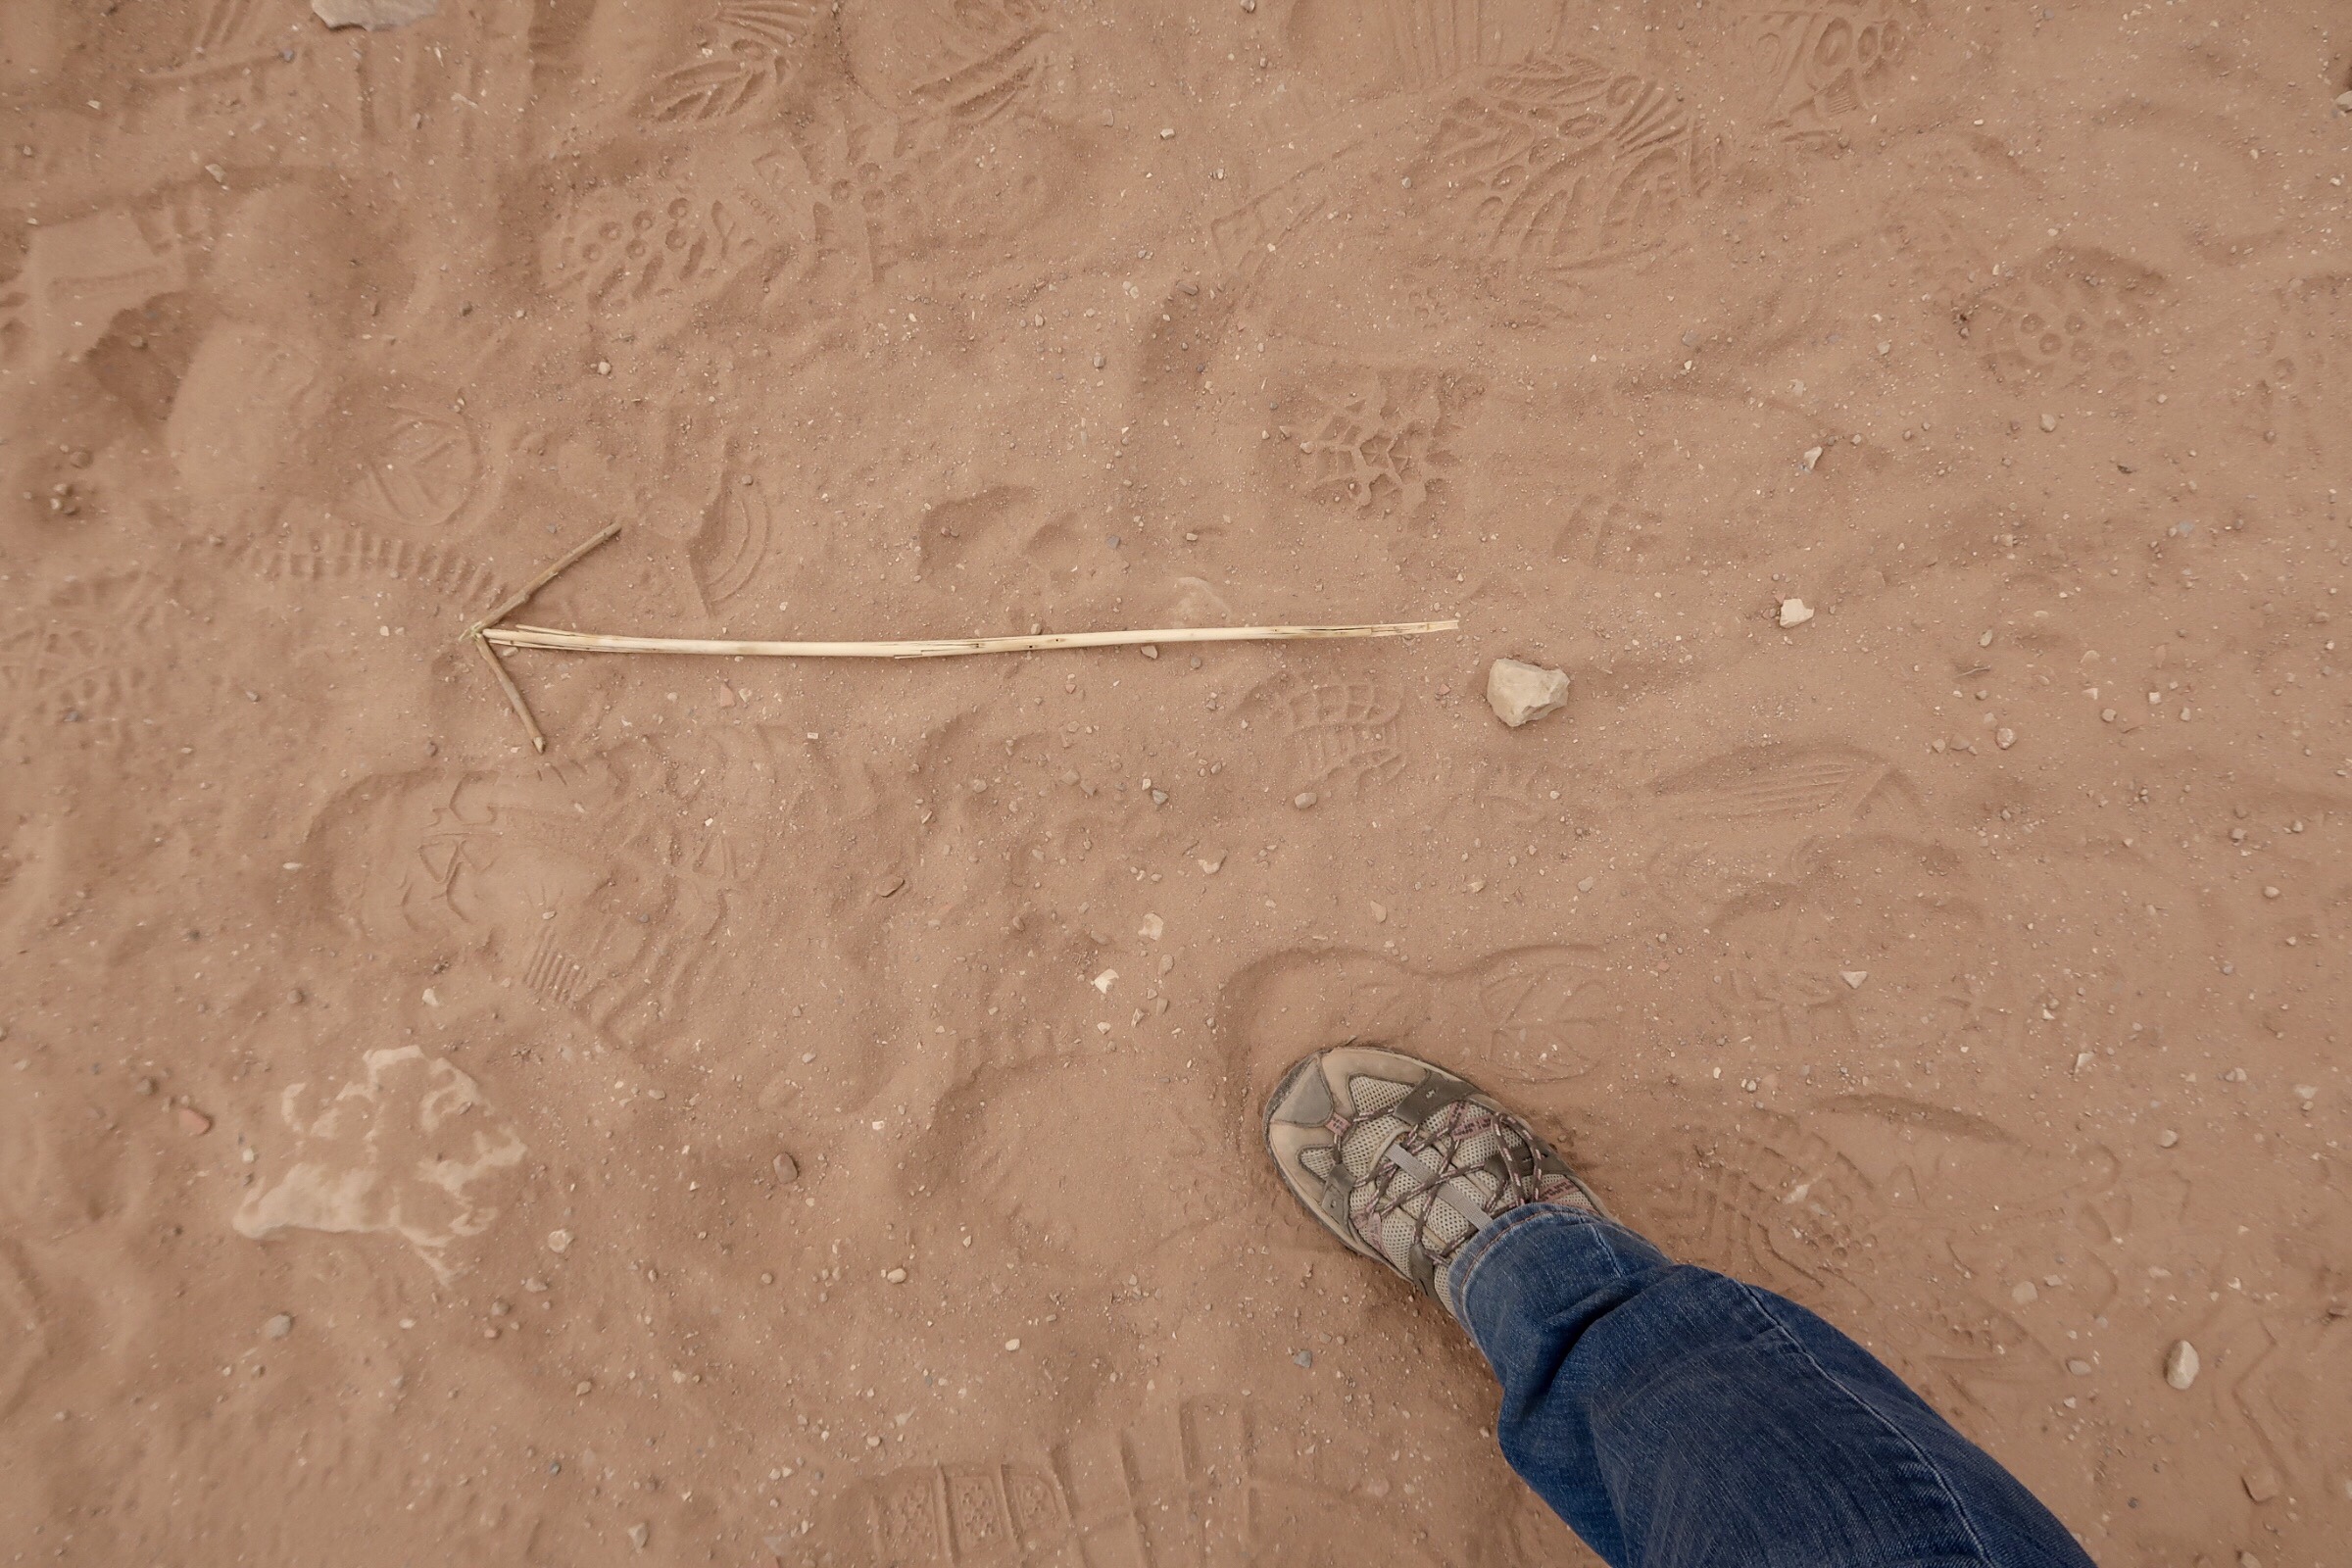 An arrow on the ground for Mr Wanderlust and I to follow